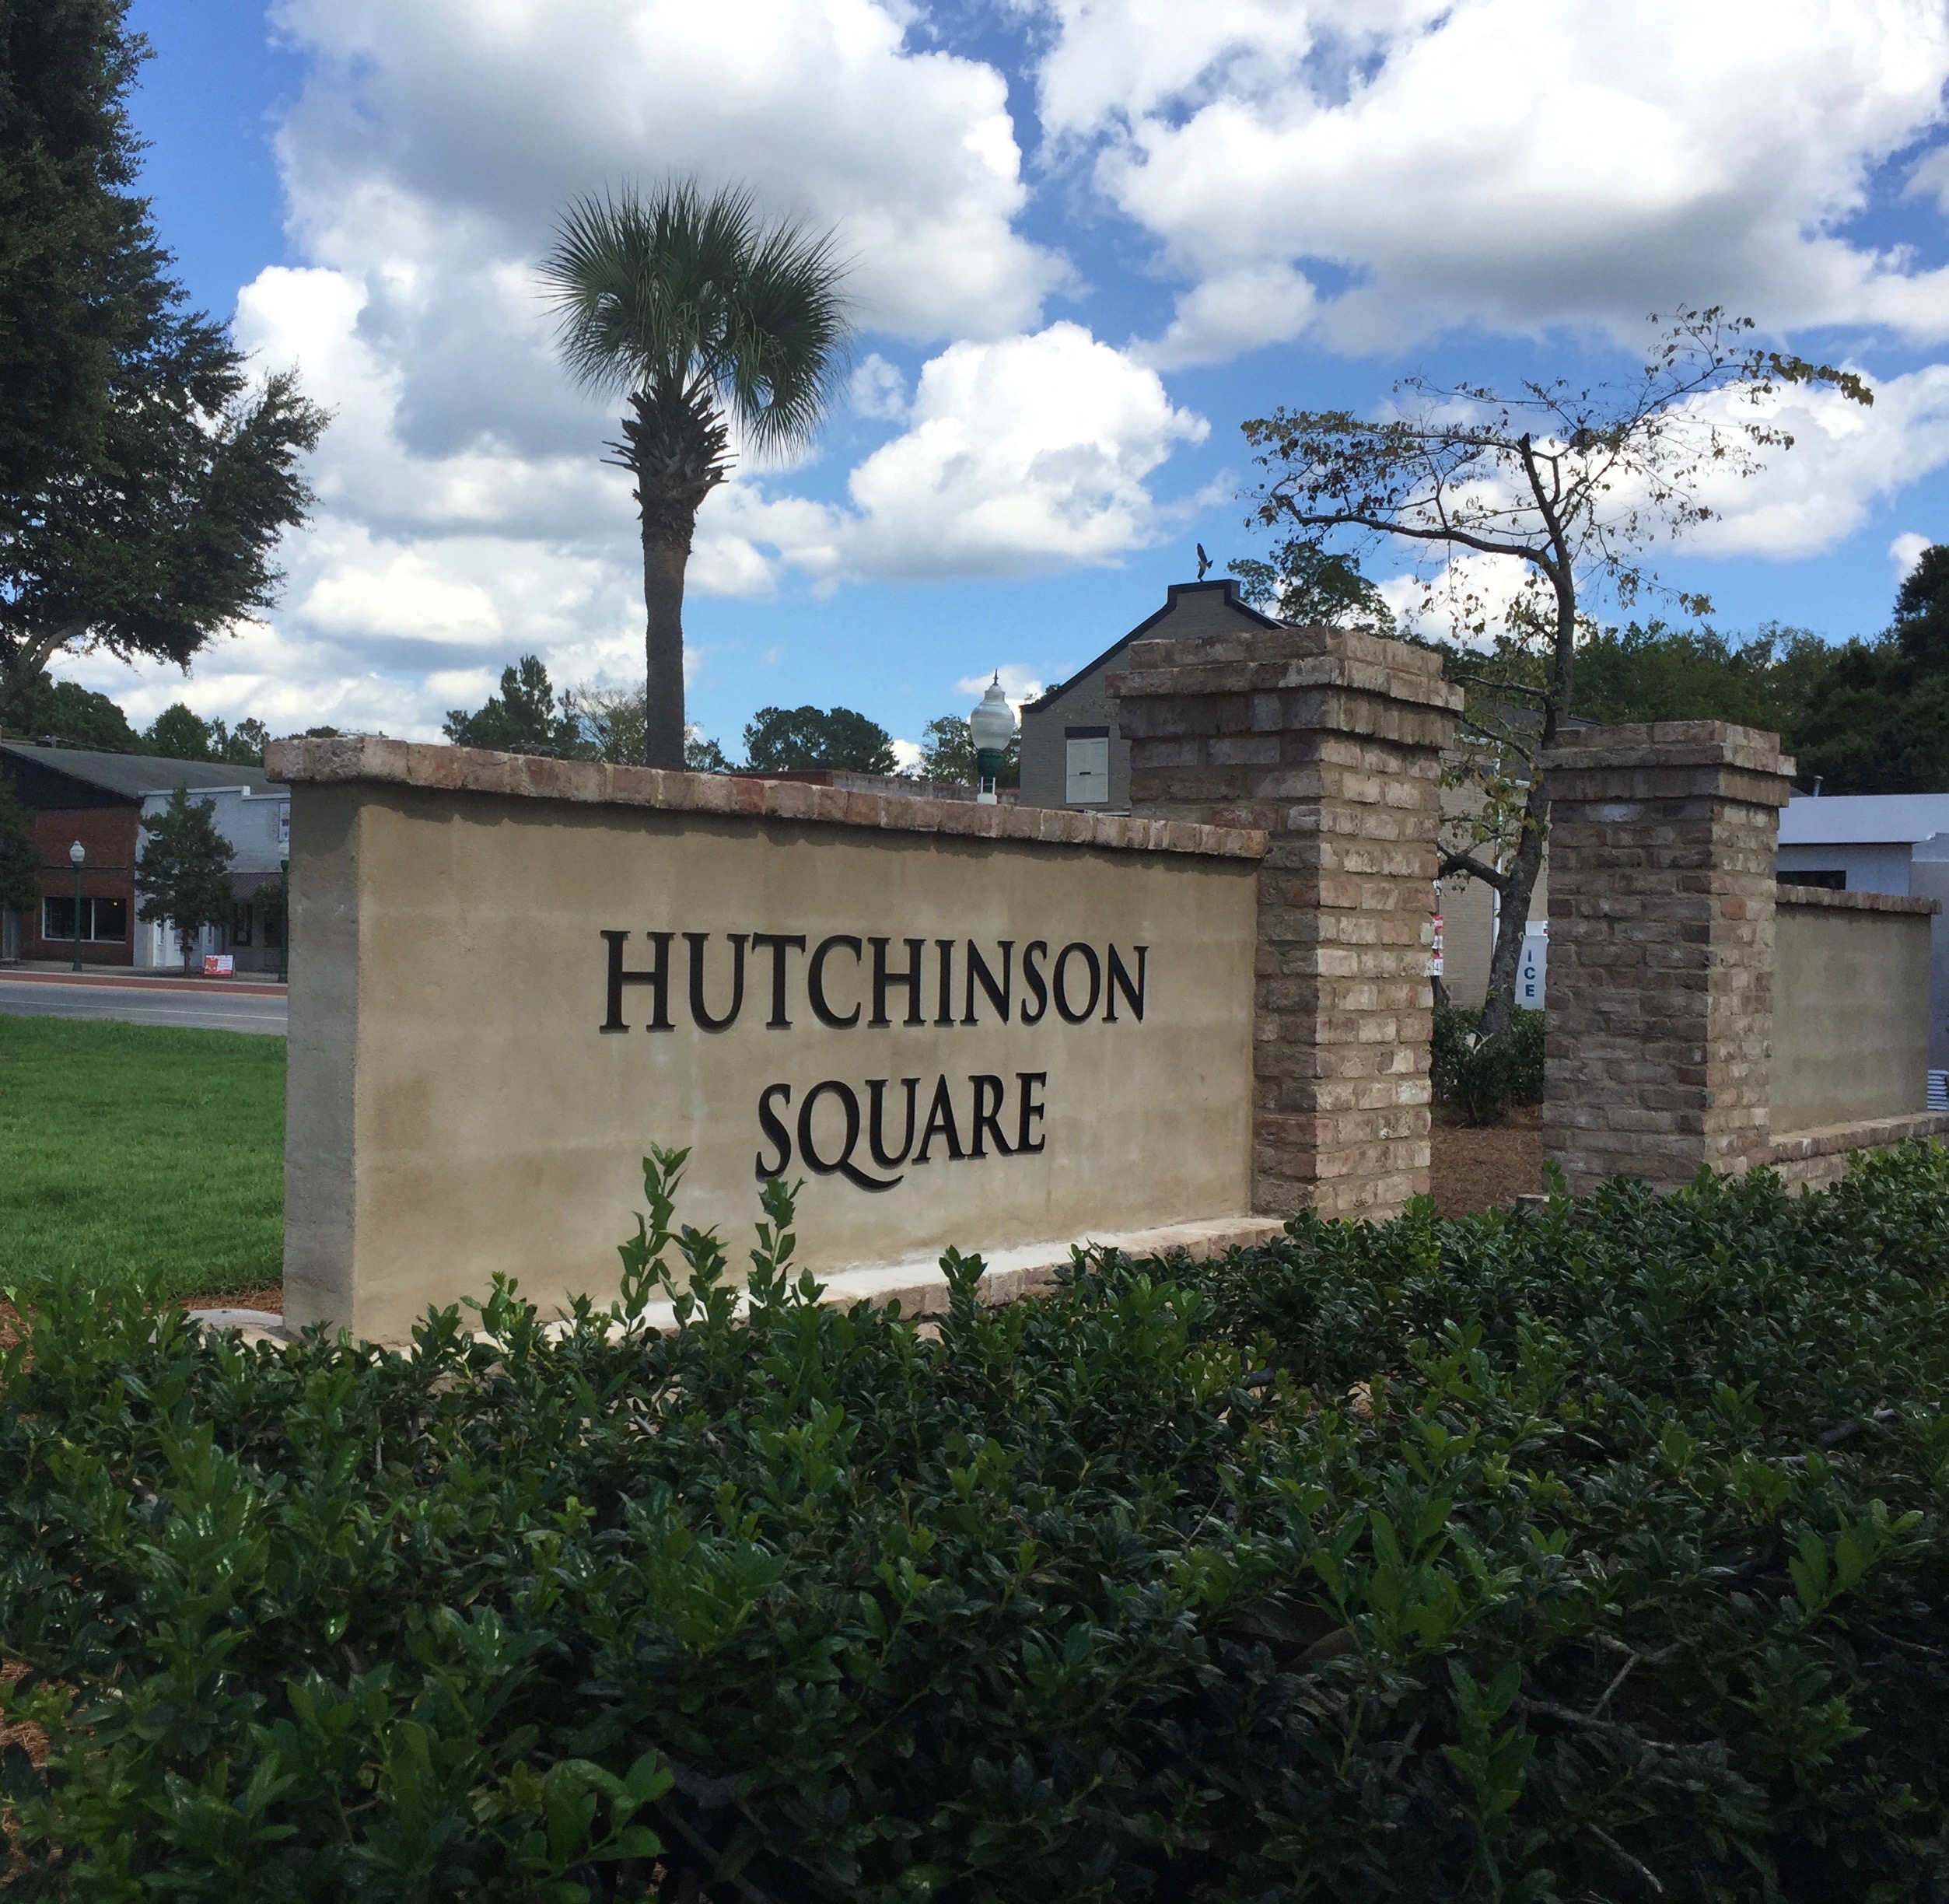 Recently revamped Hutchinson Square in downtown Summerville, S.C.